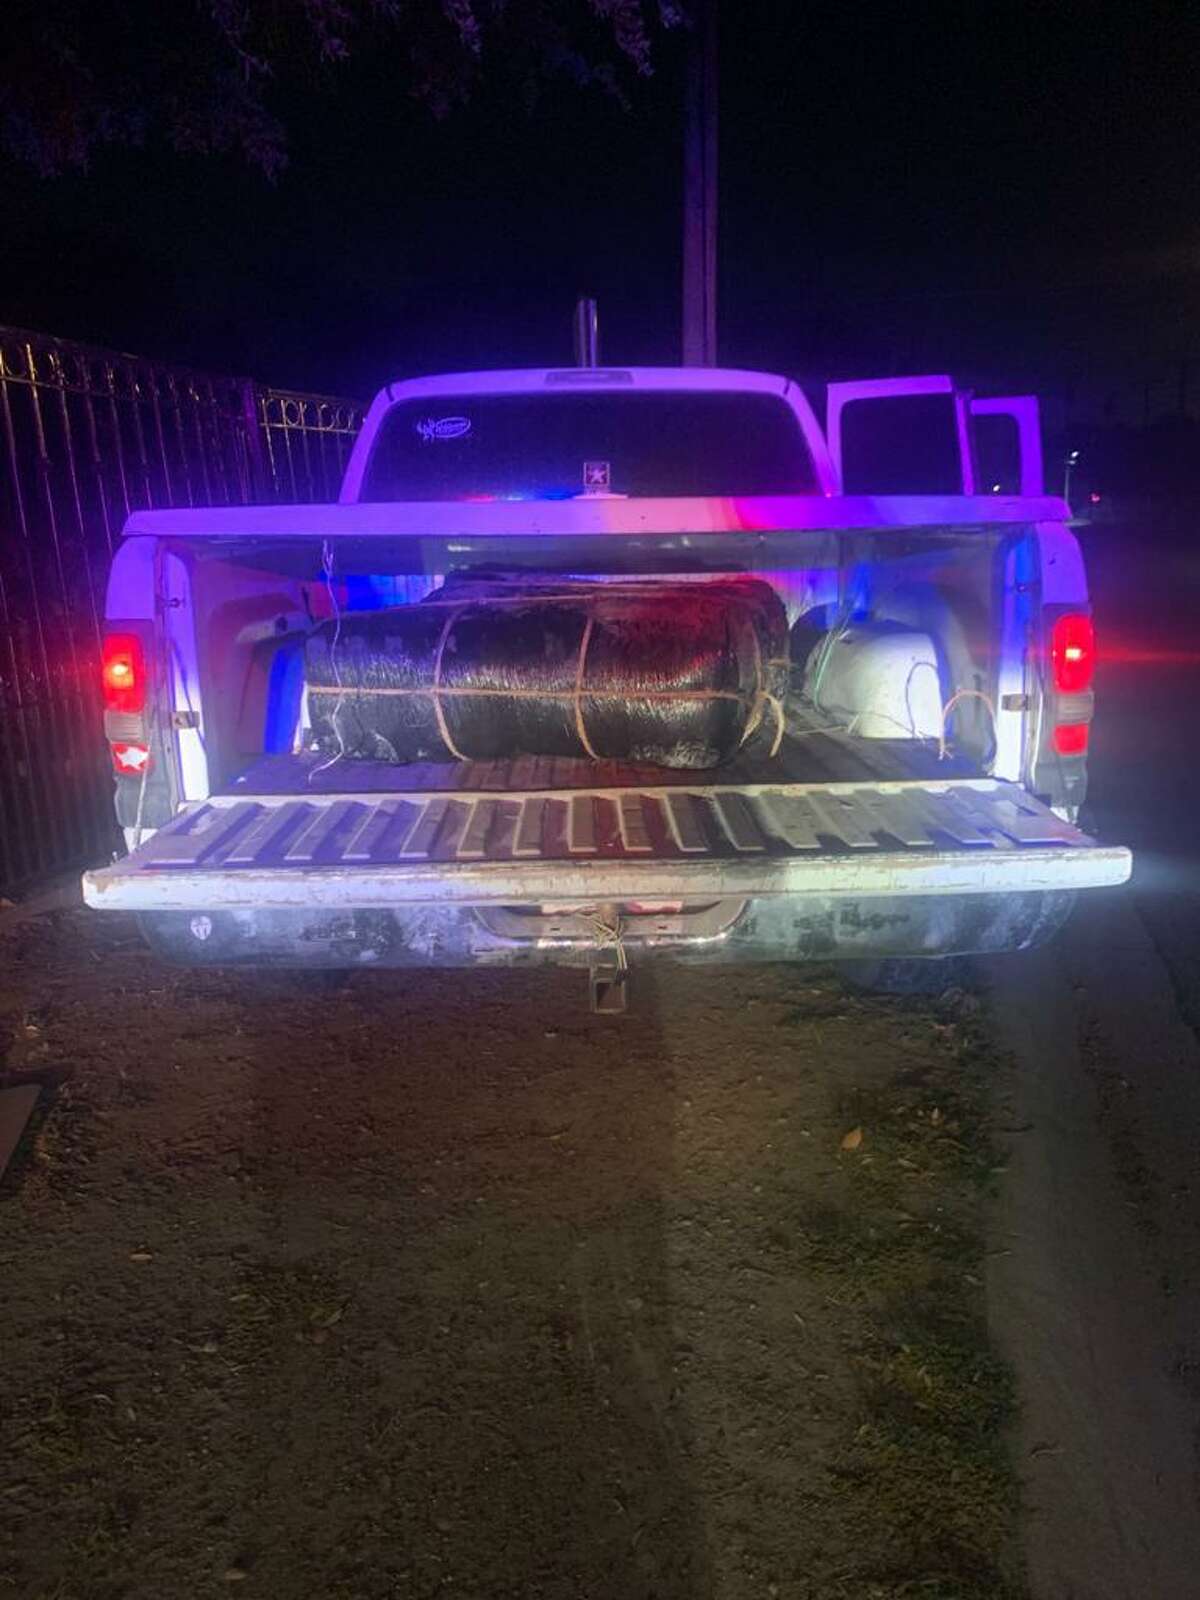 U.S. Border Patrol agents seized approximately 476 pounds of marijuana from this vehicle. The contraband had an estimated street value of $381,040.